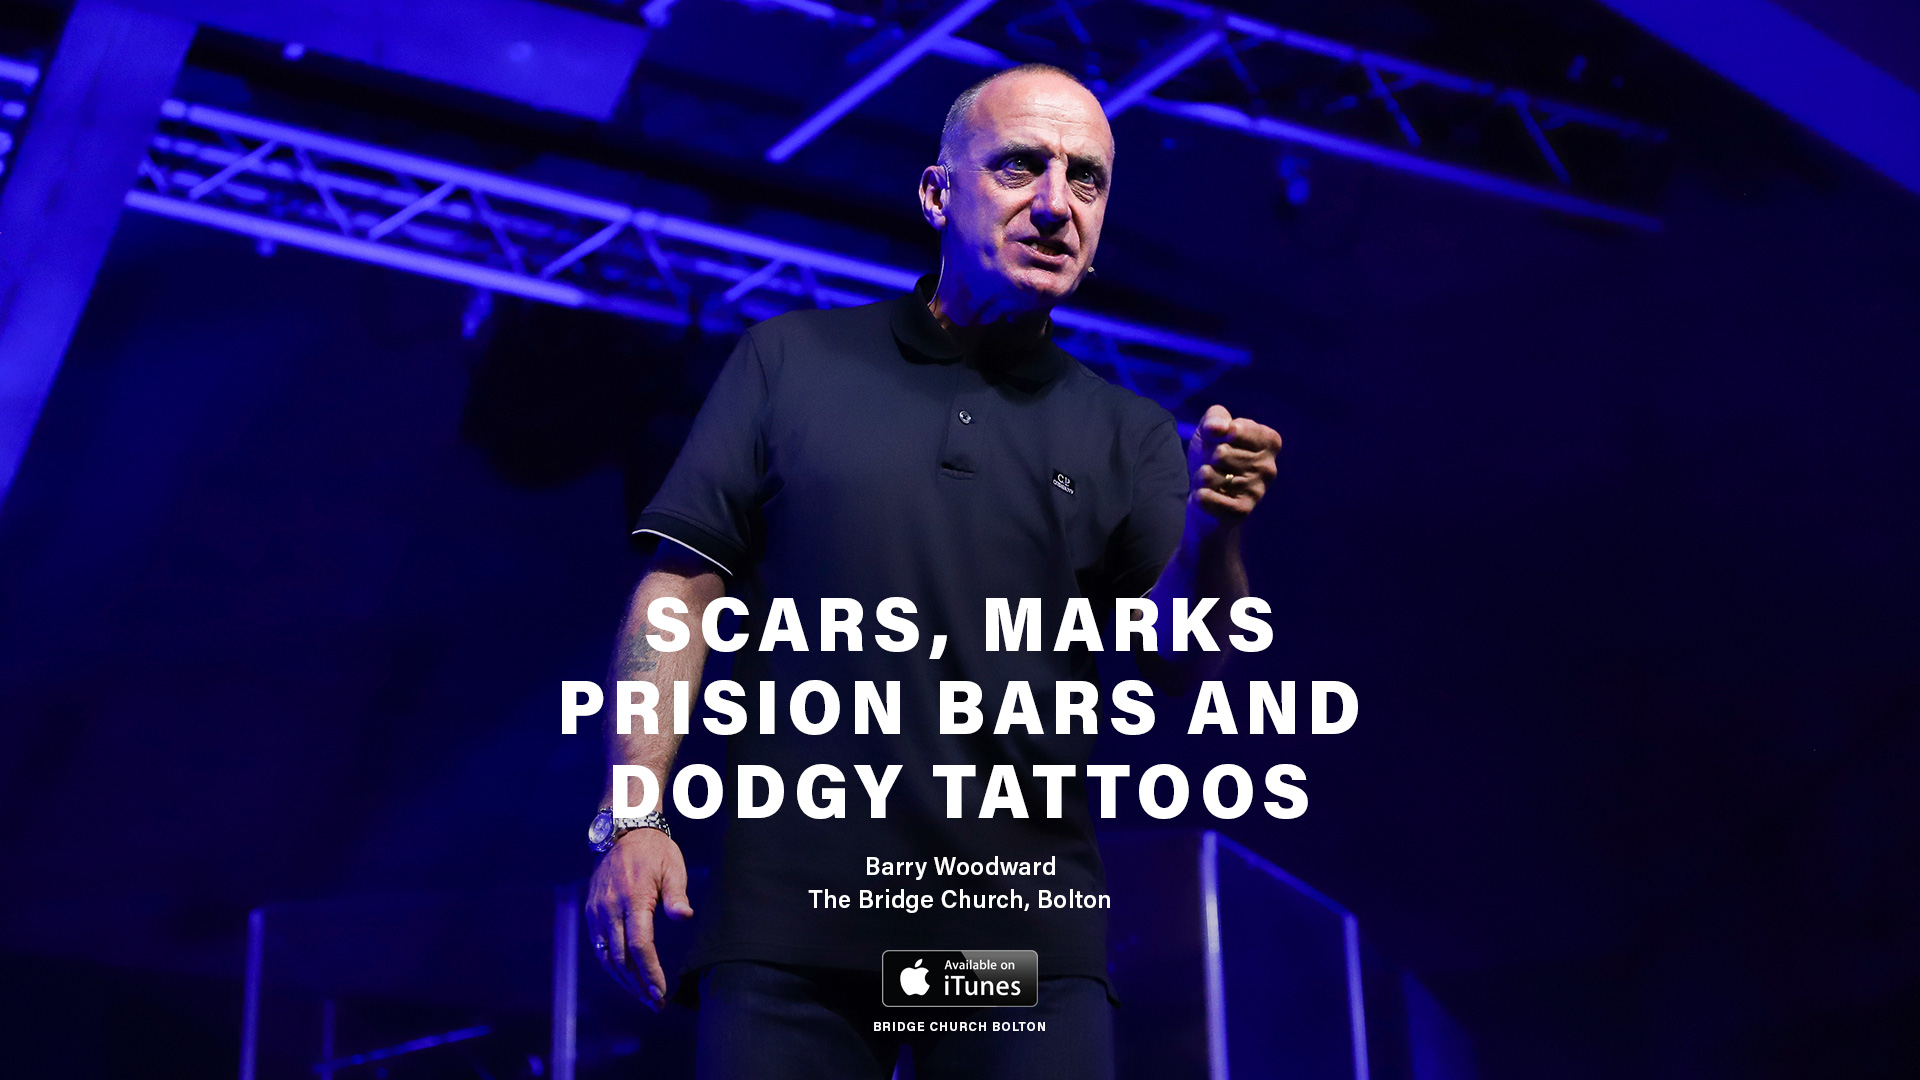 Scars, Marks, Prison Bars And Dodgy Tattoos